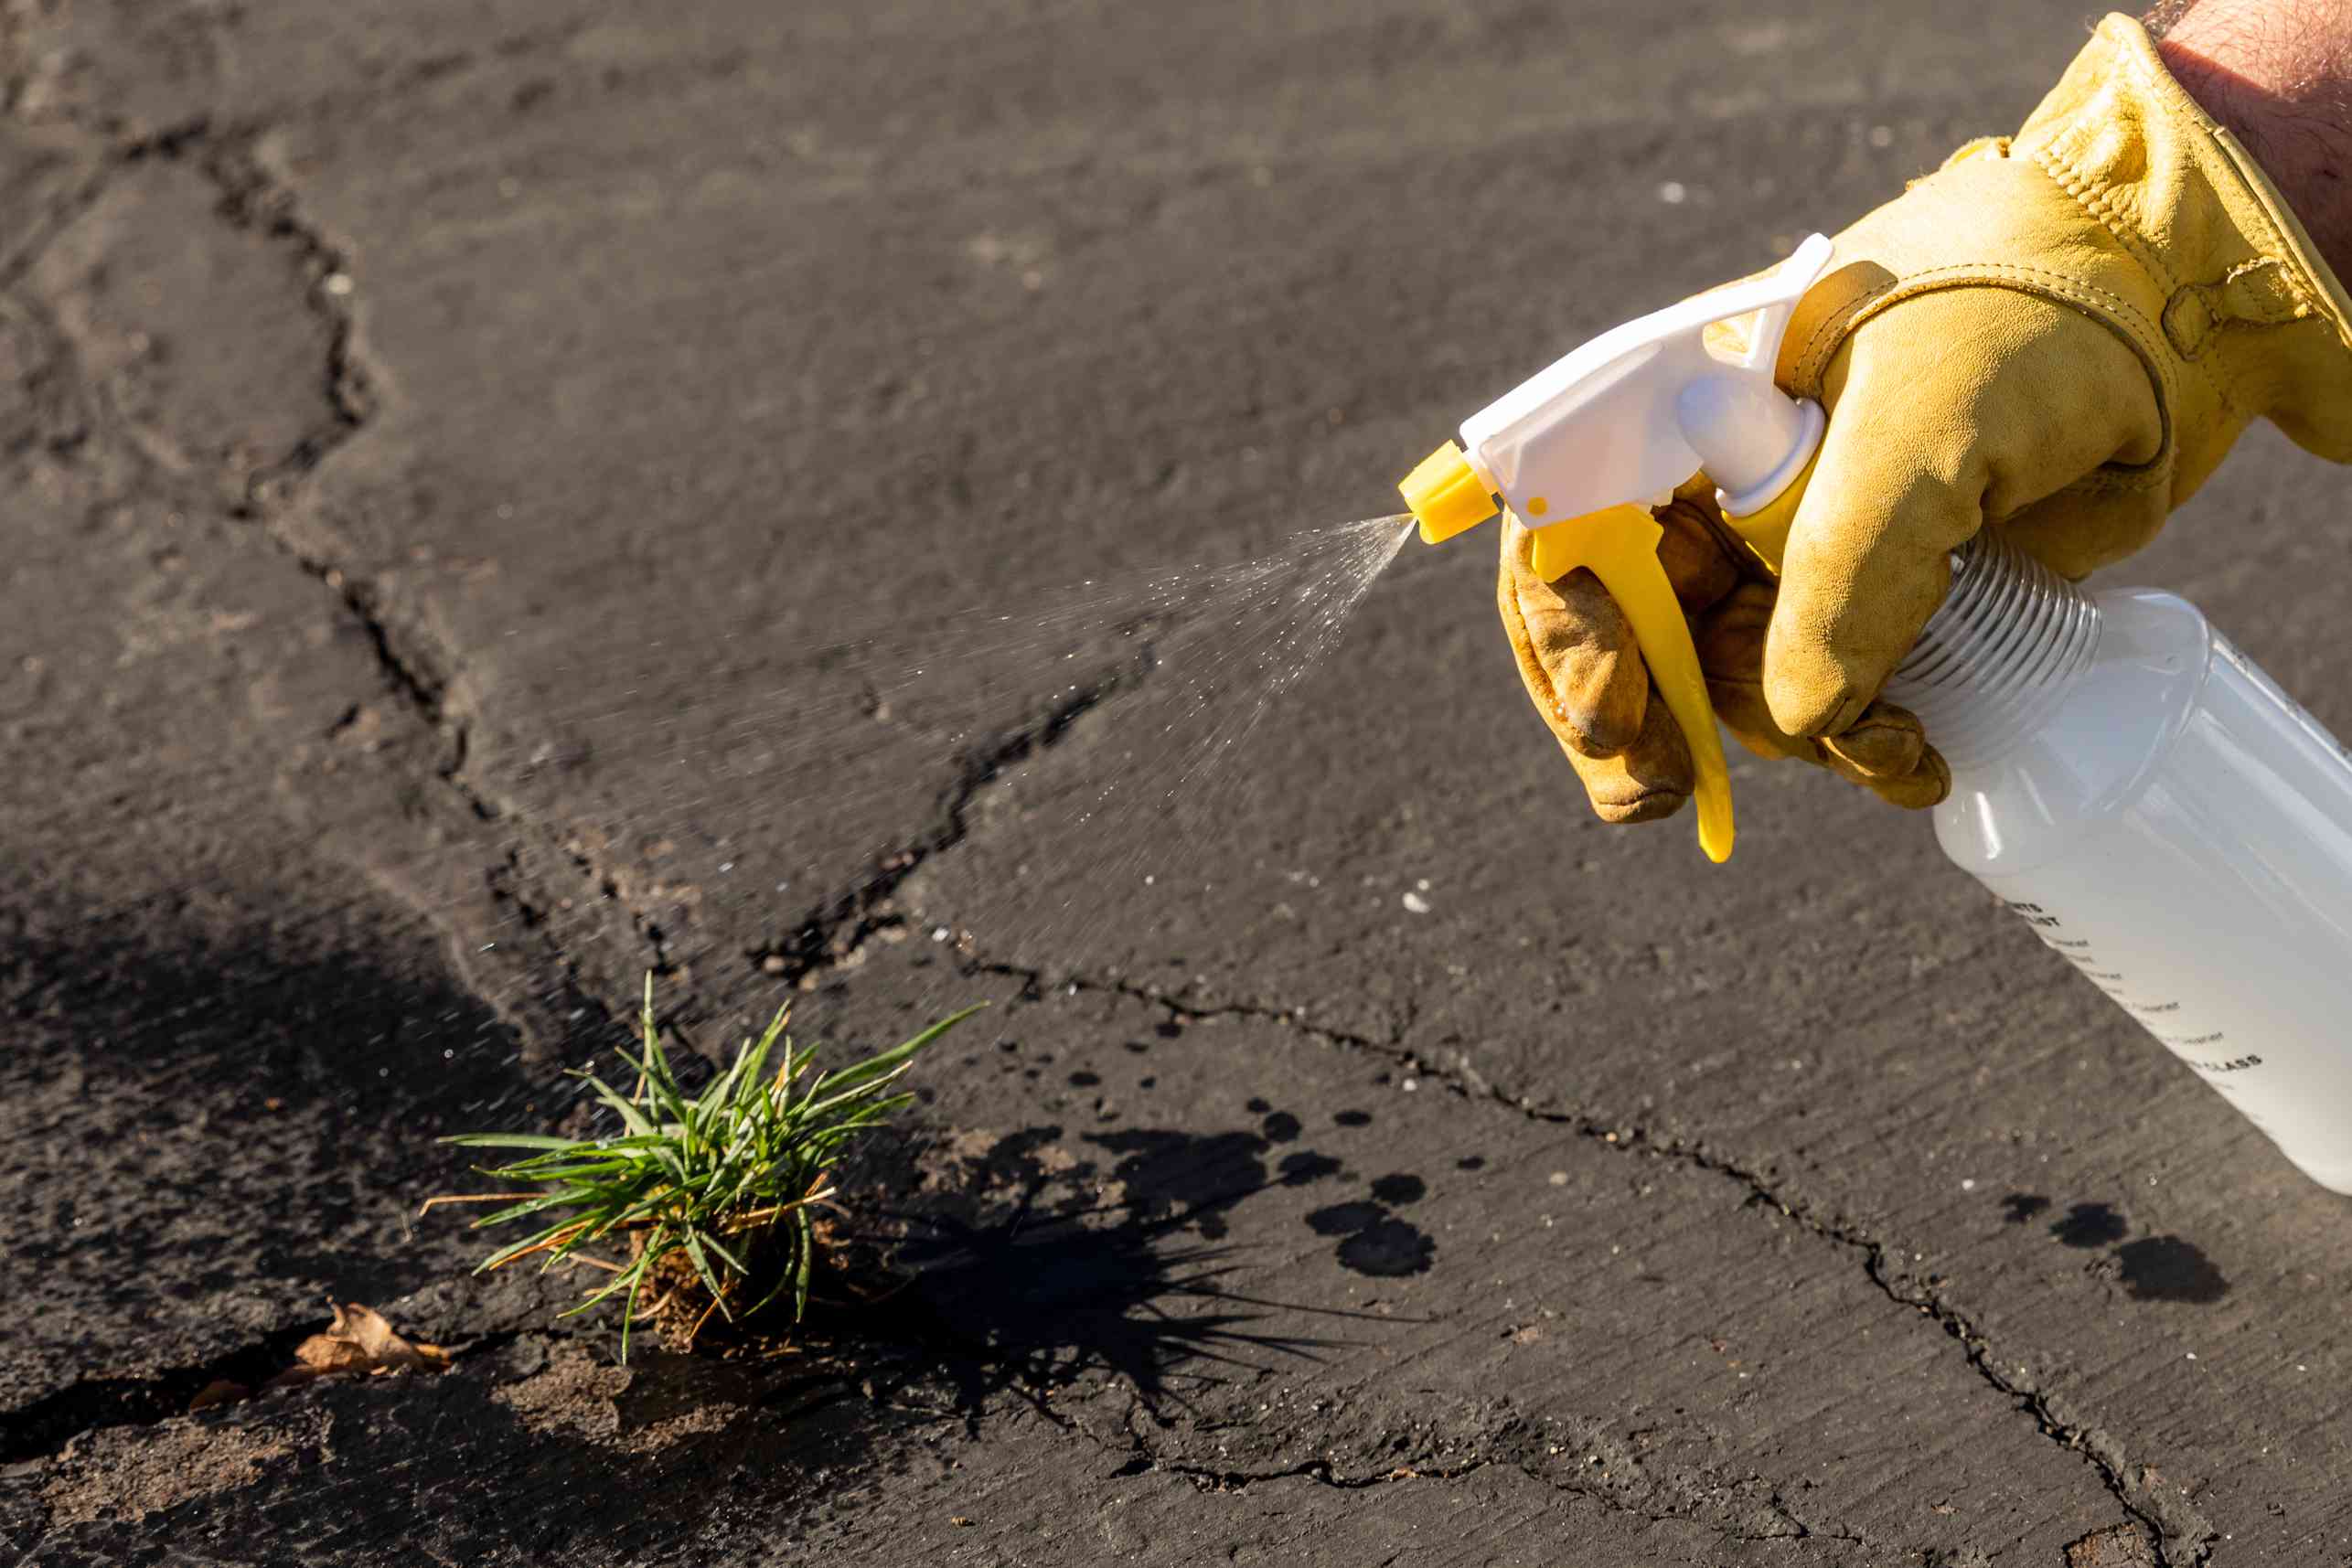 how to, does bleach really kill weeds? how to make a diy weed killer that actually works